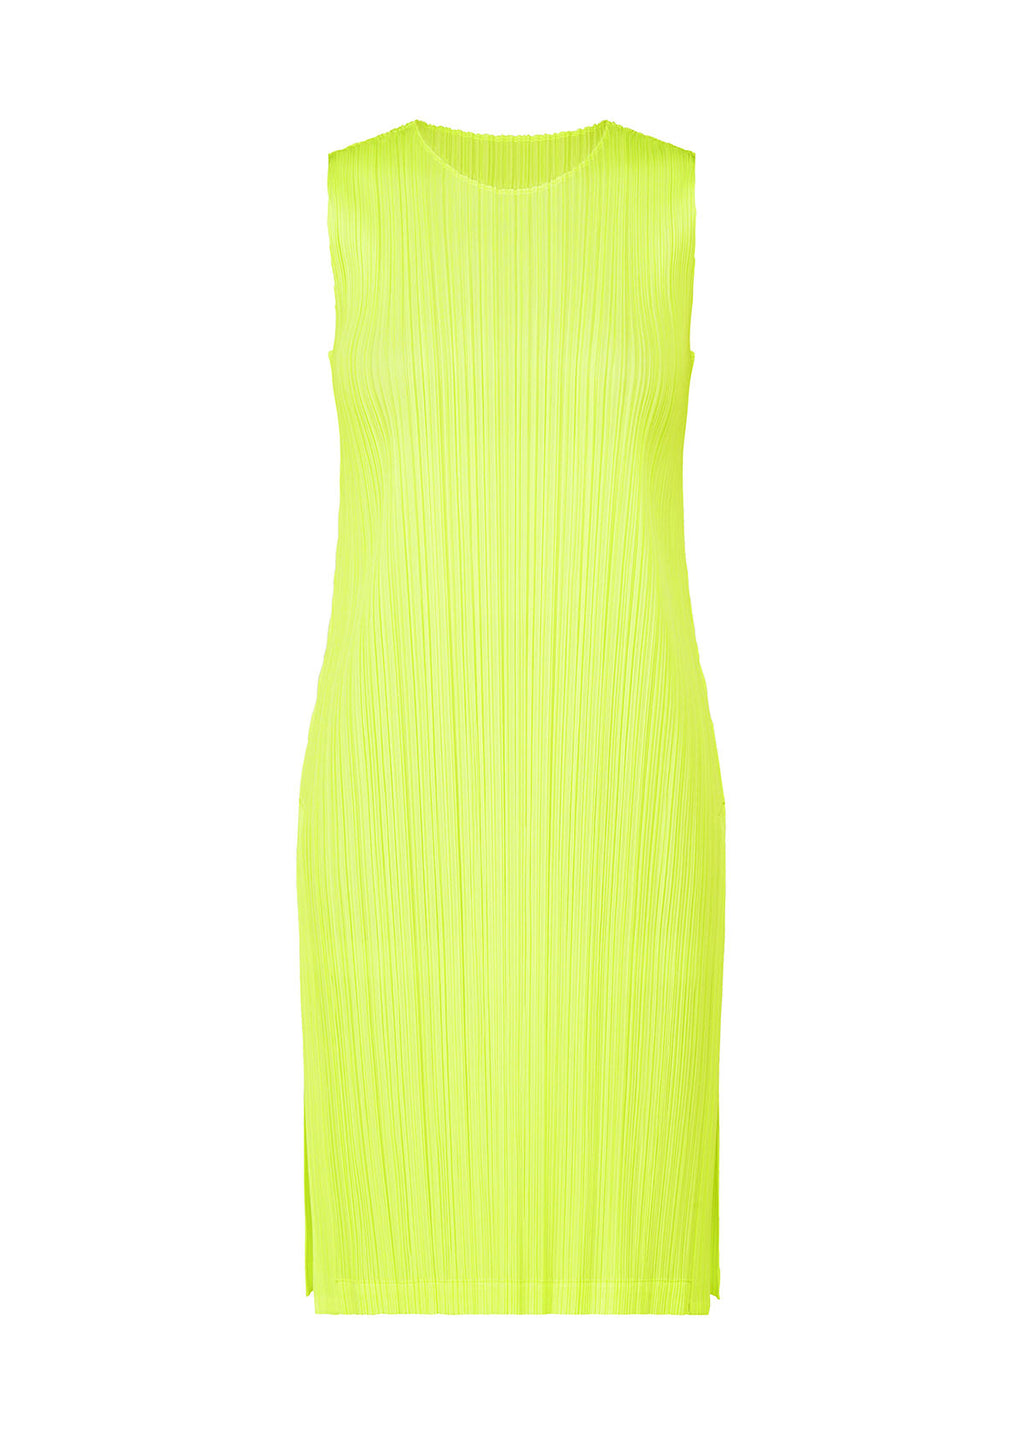 March Monthly Colors Tunic in Neon Yellow by Pleats Please Issey Miyake